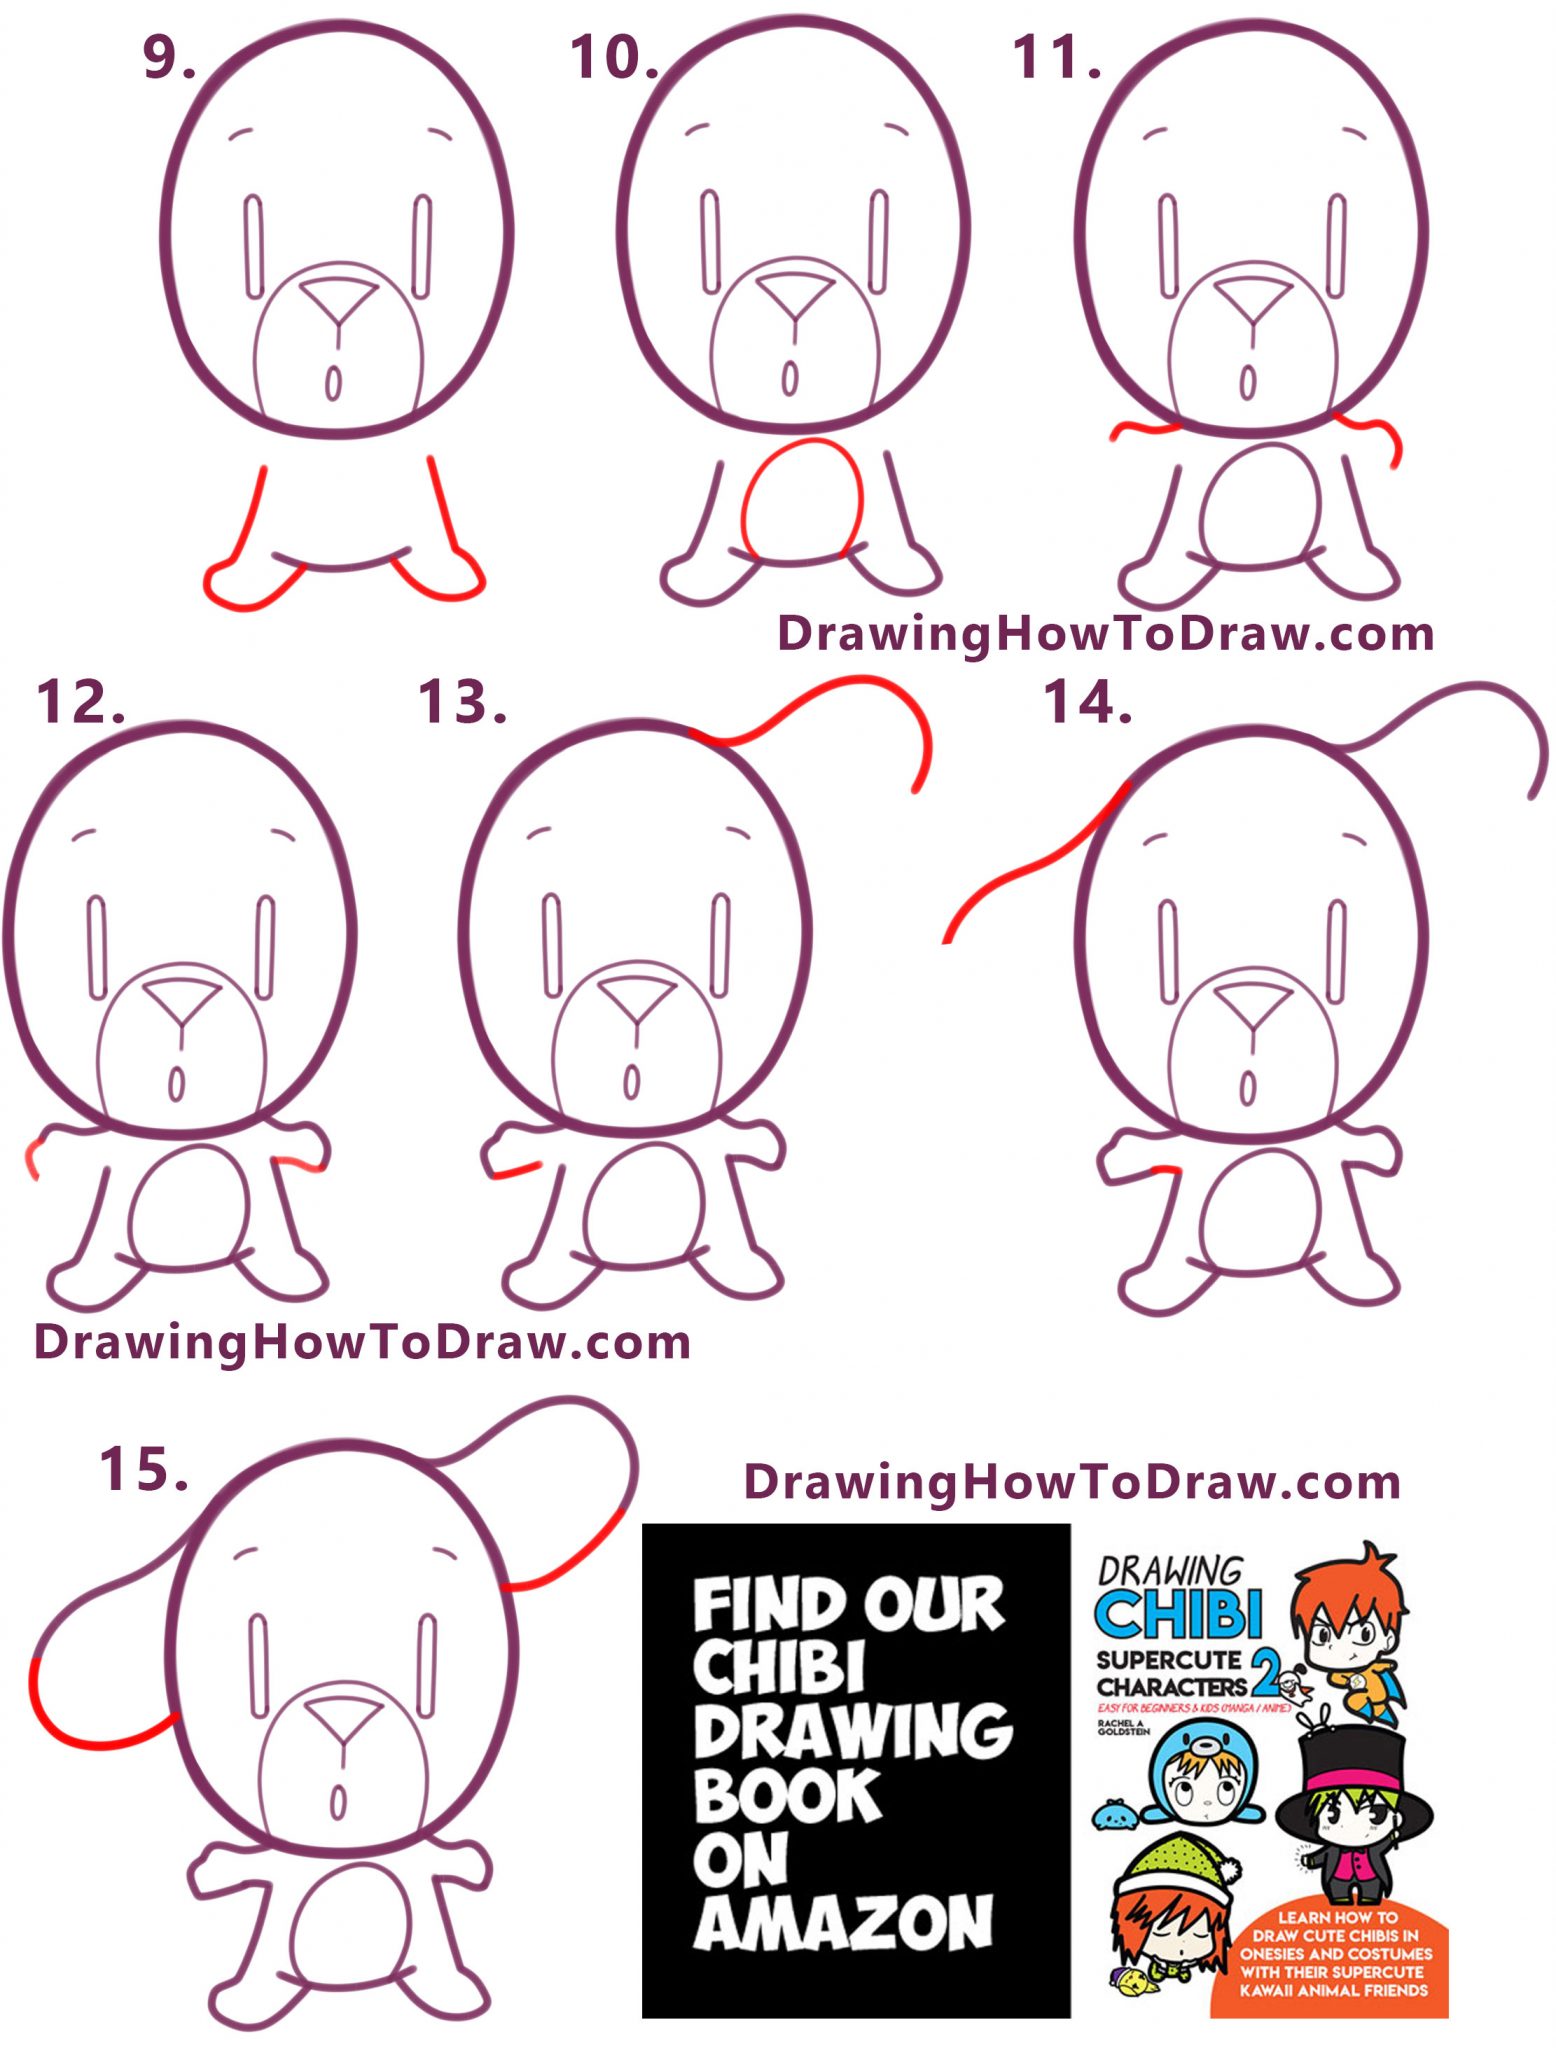 How to Draw a Cartoon Dog Standing on Two Legs Easy Step by Step